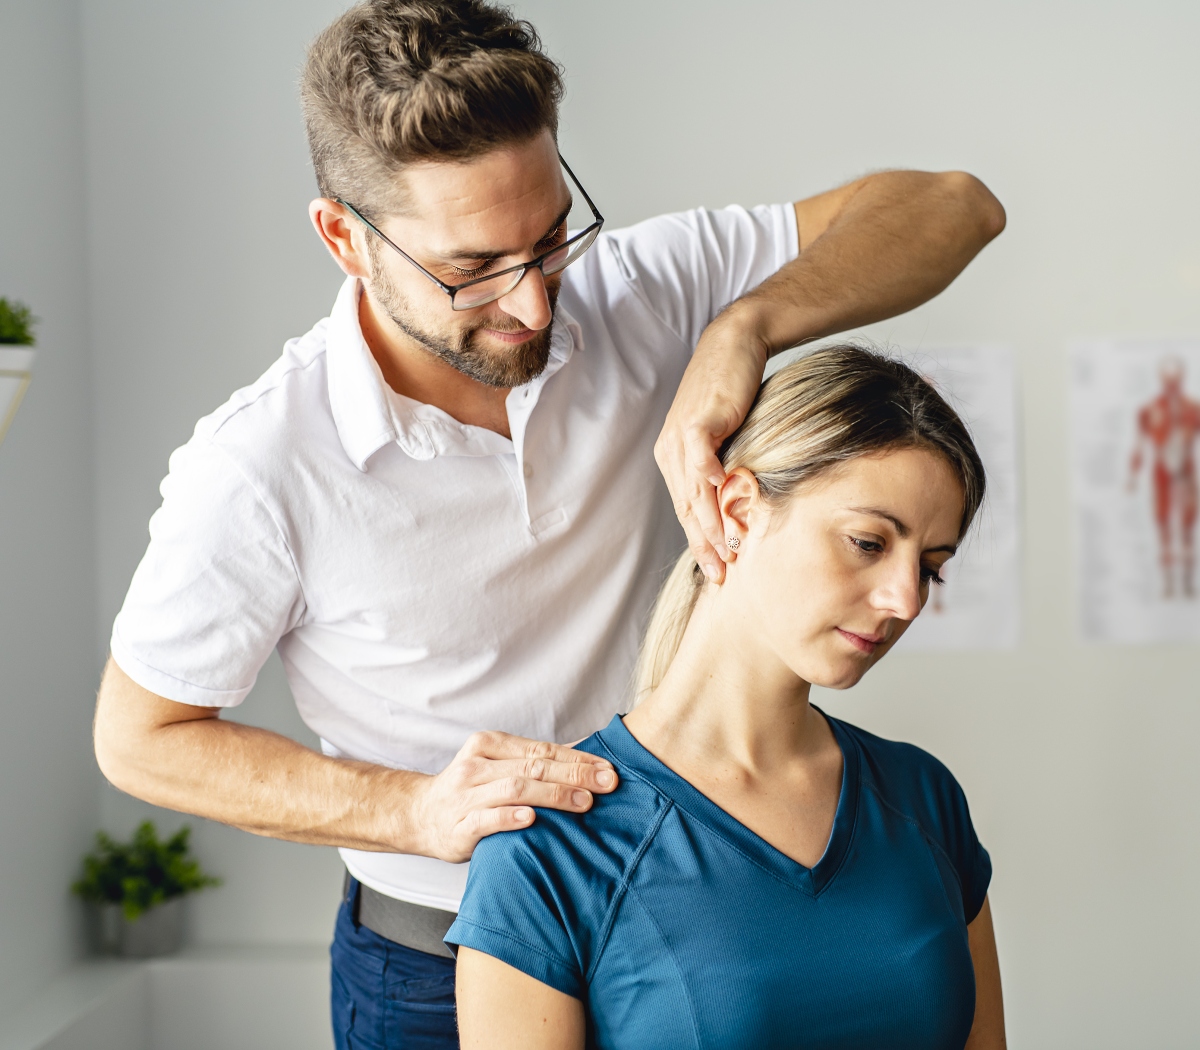 8 chiro marketing tactics to become patients' top choice.